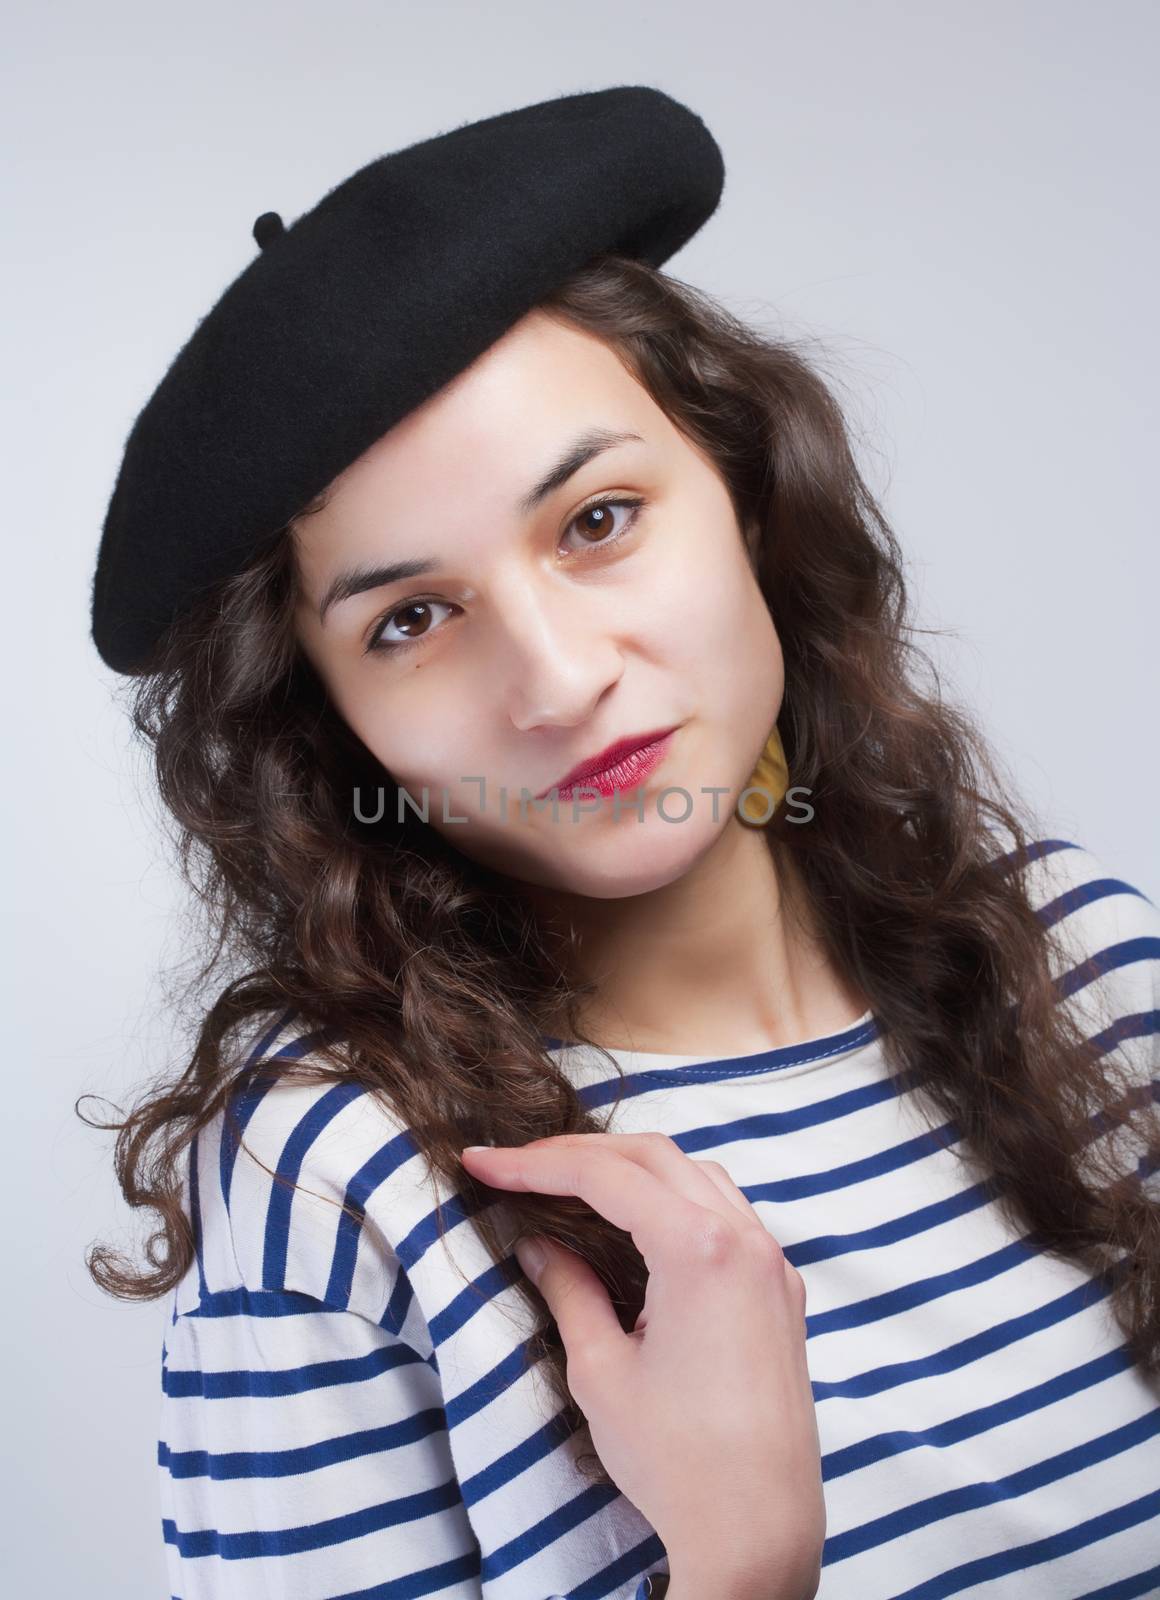 Young Beautiful Woman with French Style Beret and Striped T-Shir by courtyardpix